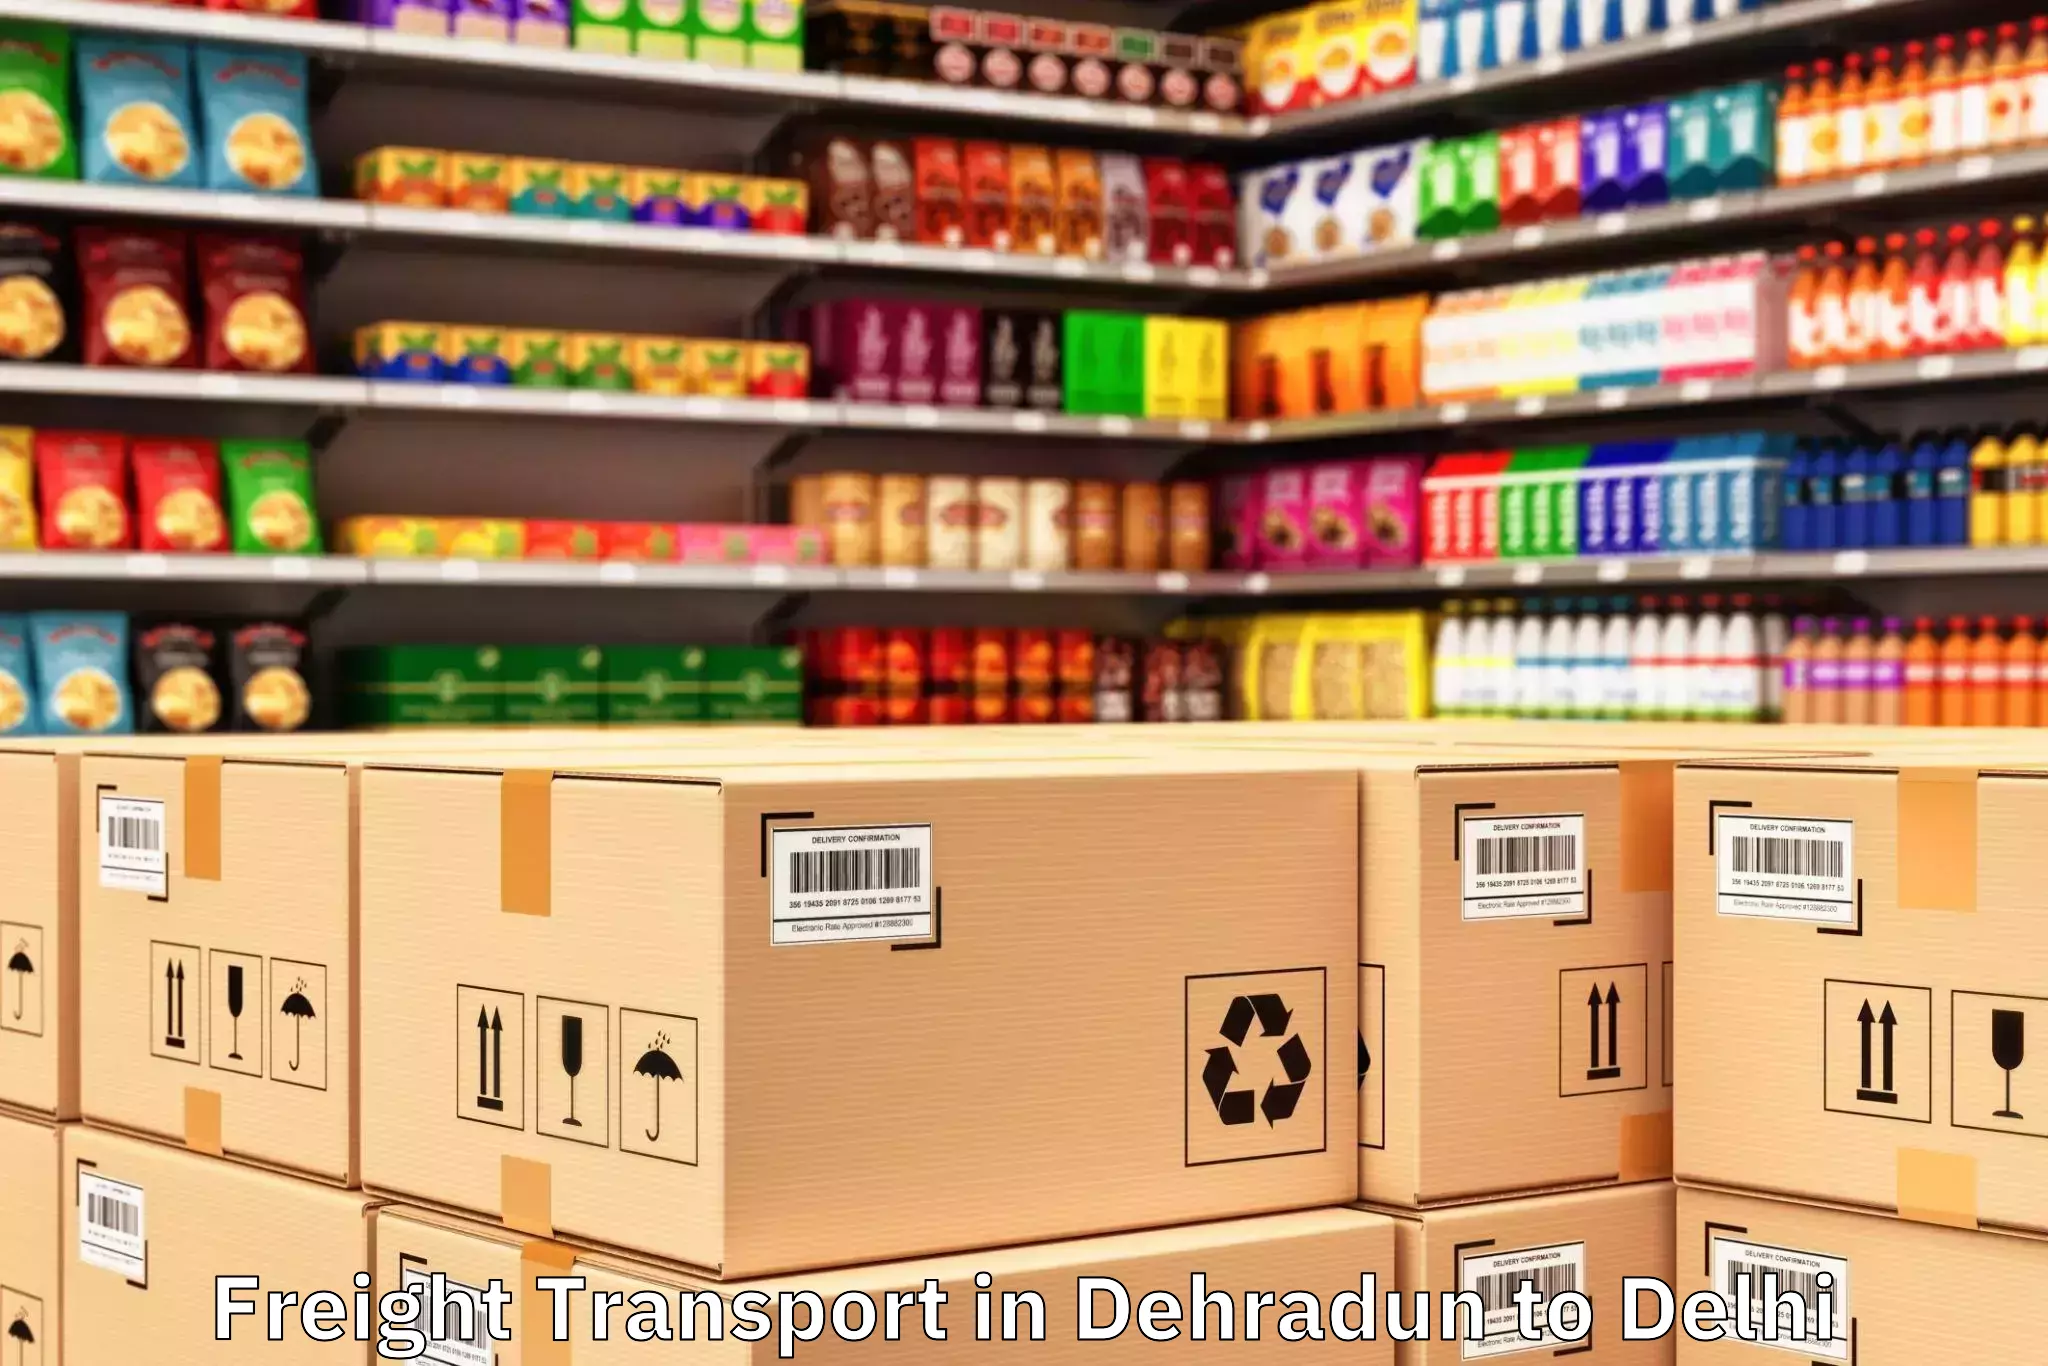 Comprehensive Dehradun to Indian Agricultural Research Institute New Delhi Freight Transport